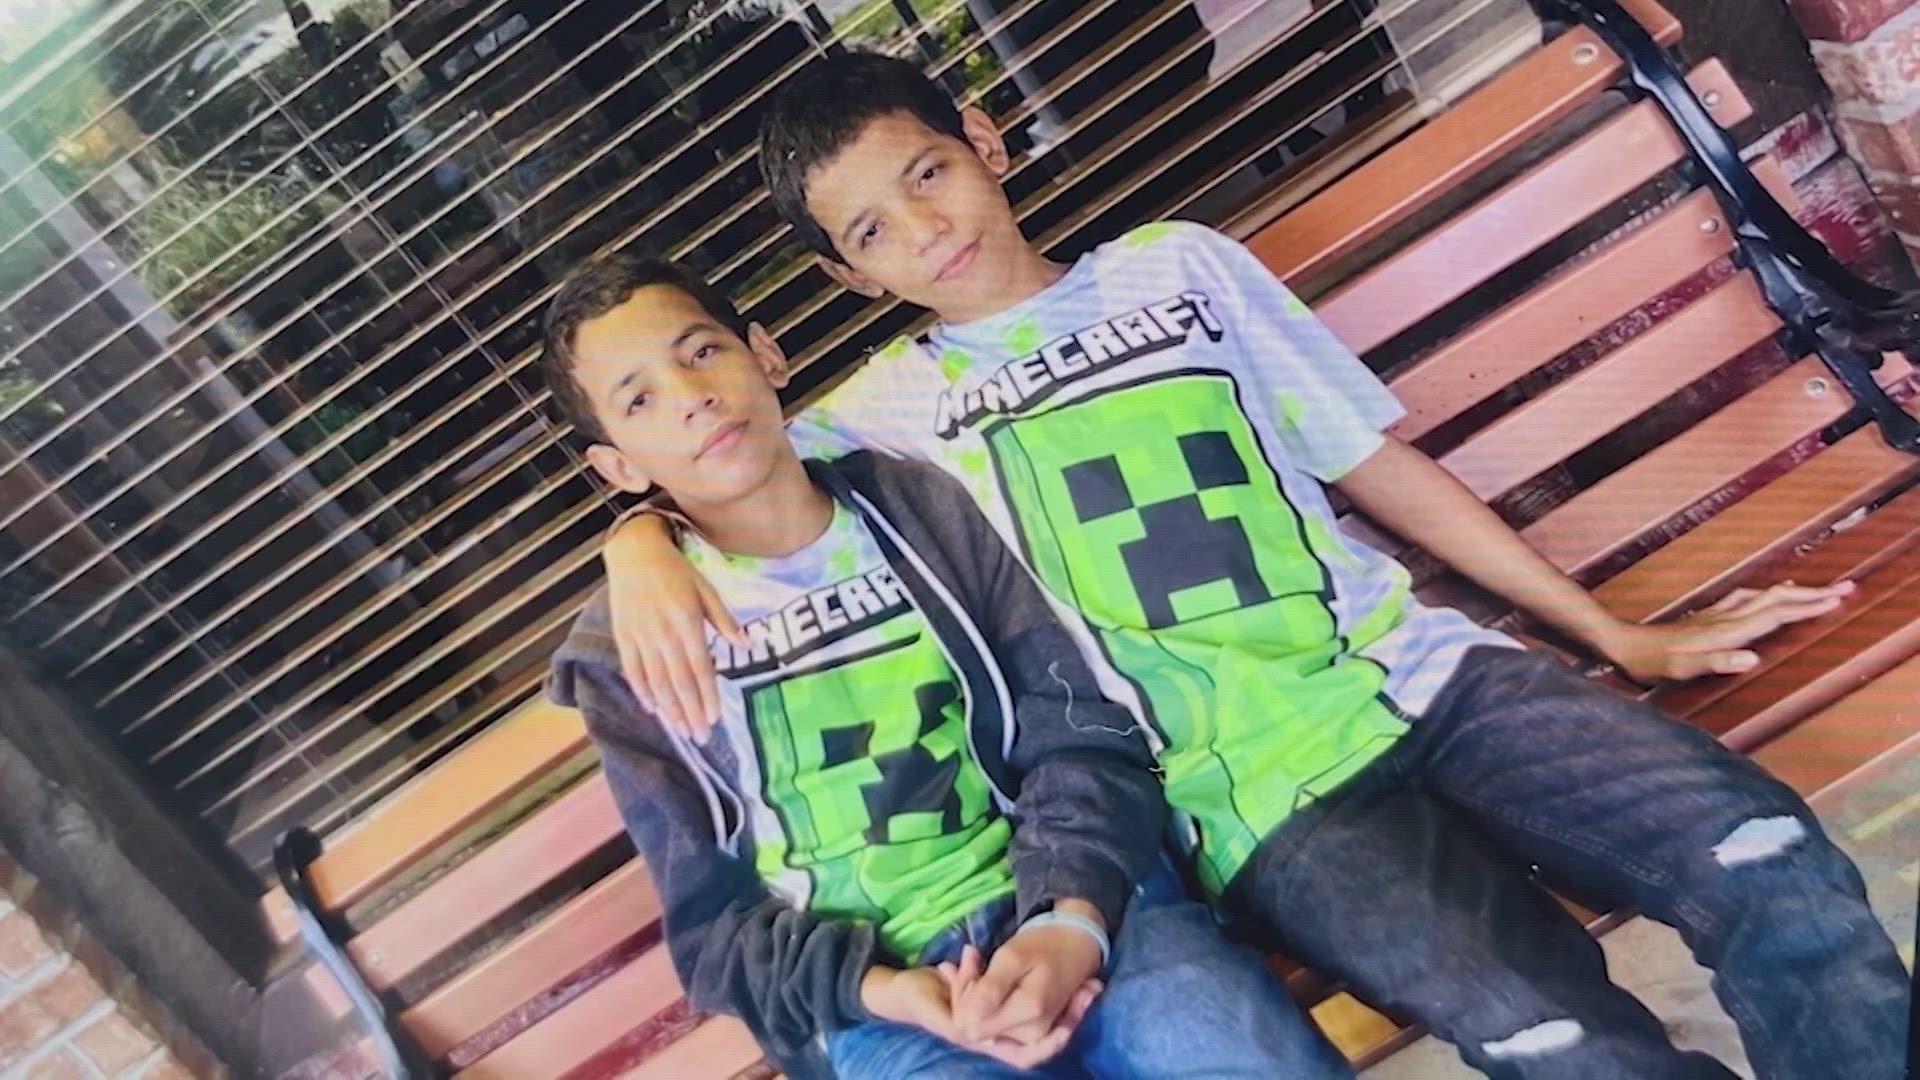 According to officials, 13-year-old twin brothers went missing near Pleasure Pier on Sunday evening. One of their bodies was found a couple of days later.